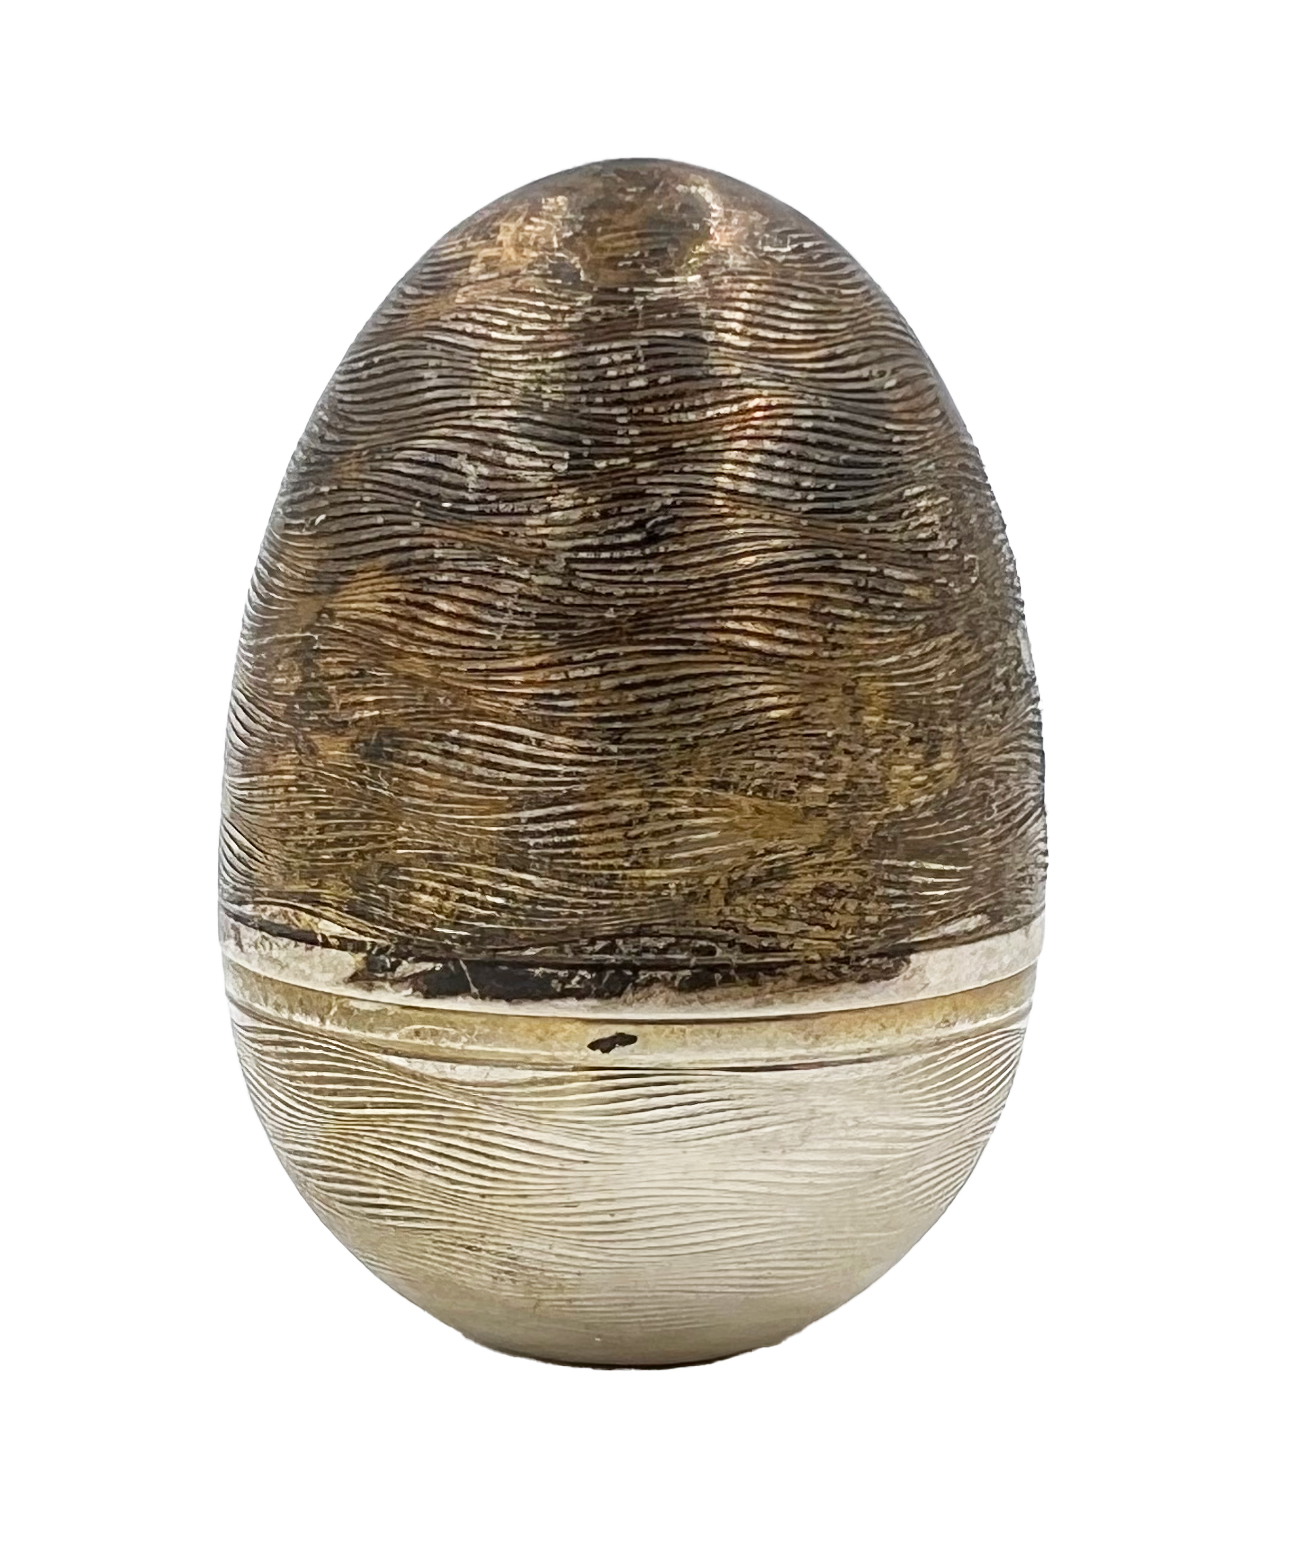 A NICHOLAS PLUMMER SILVER SURPRISE EGG THAT OPENS TO REVEAL DAISIES, LONOND, NICHOLOS PLUMMER, 2004 - Image 2 of 5